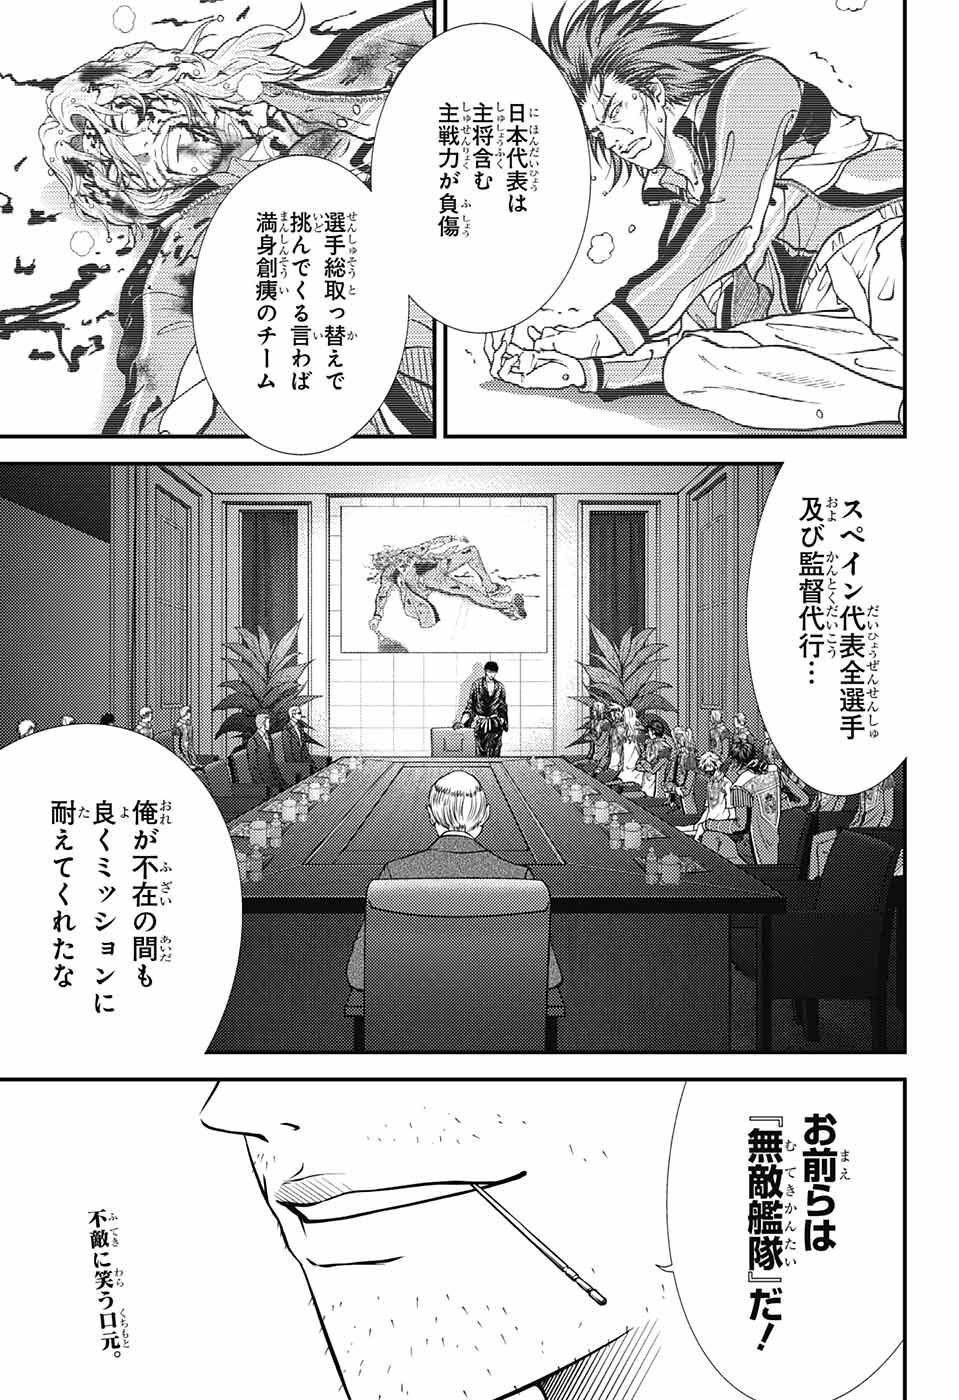 Shin Prince of Tennis - Chapter 388 - Page 1